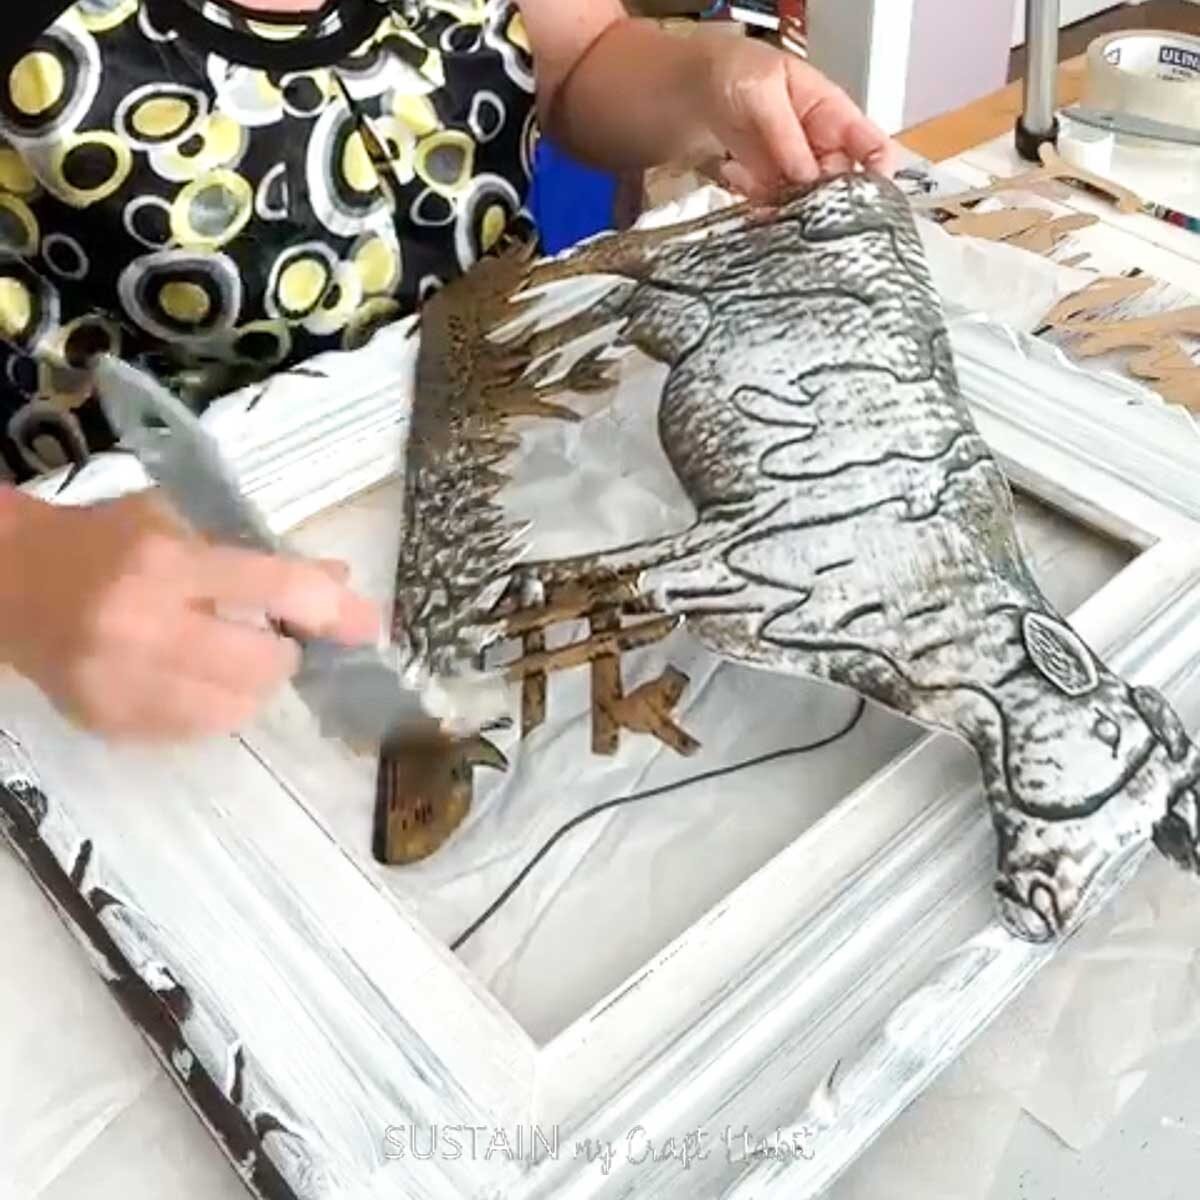 Painting a metal cow with white paint.